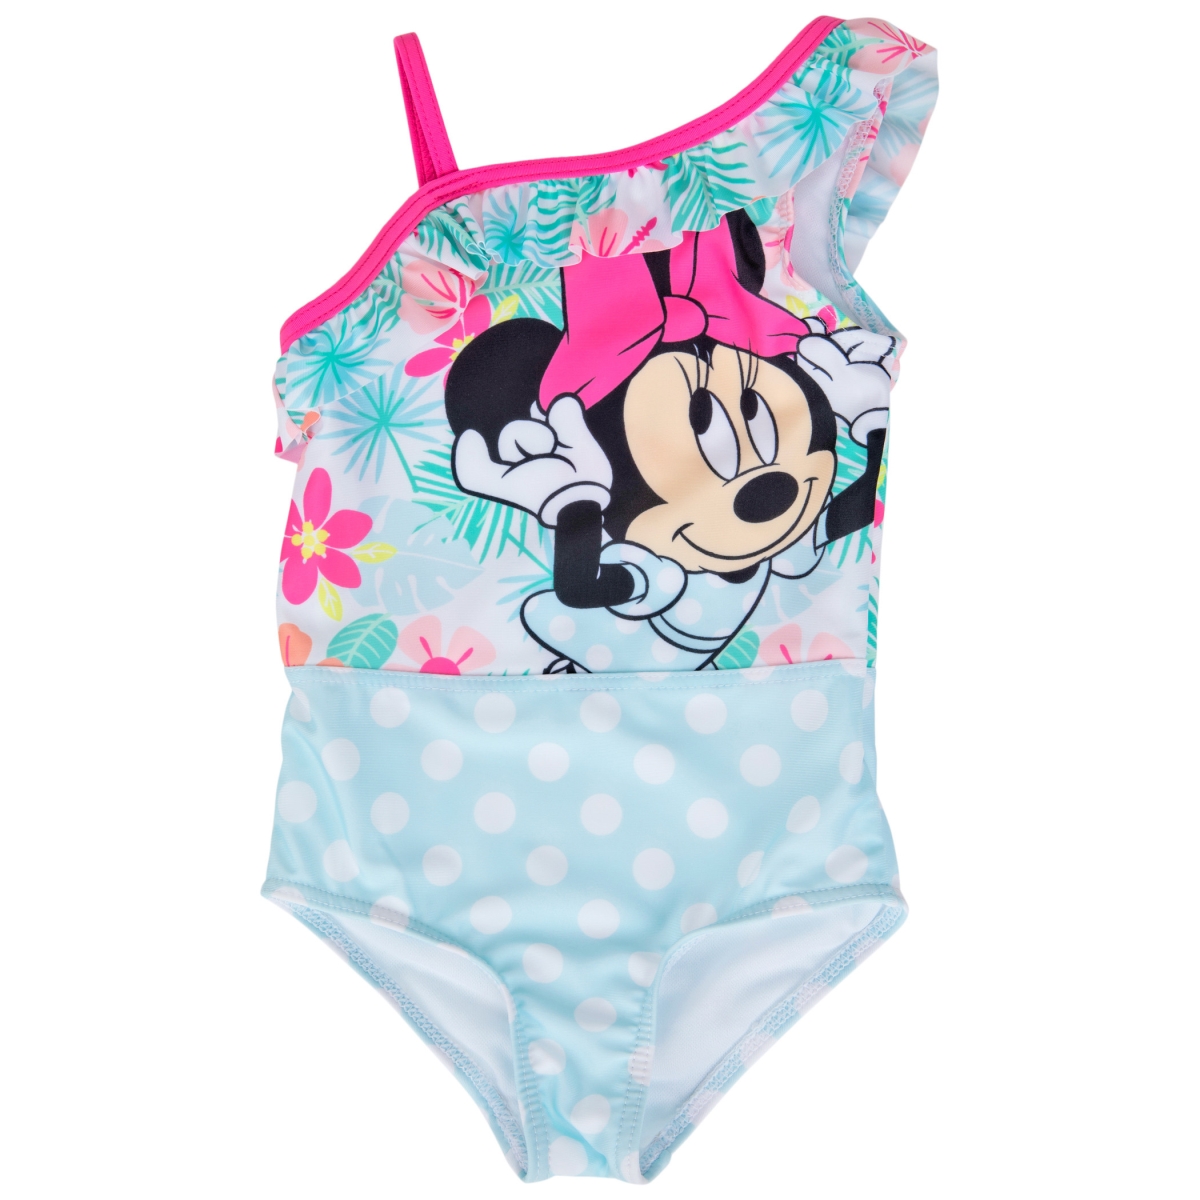 Picture of Disney 830061-toddler4t Disney Minnie Mouse Floral Toddler One Piece Swimsuit - Toddler 4T